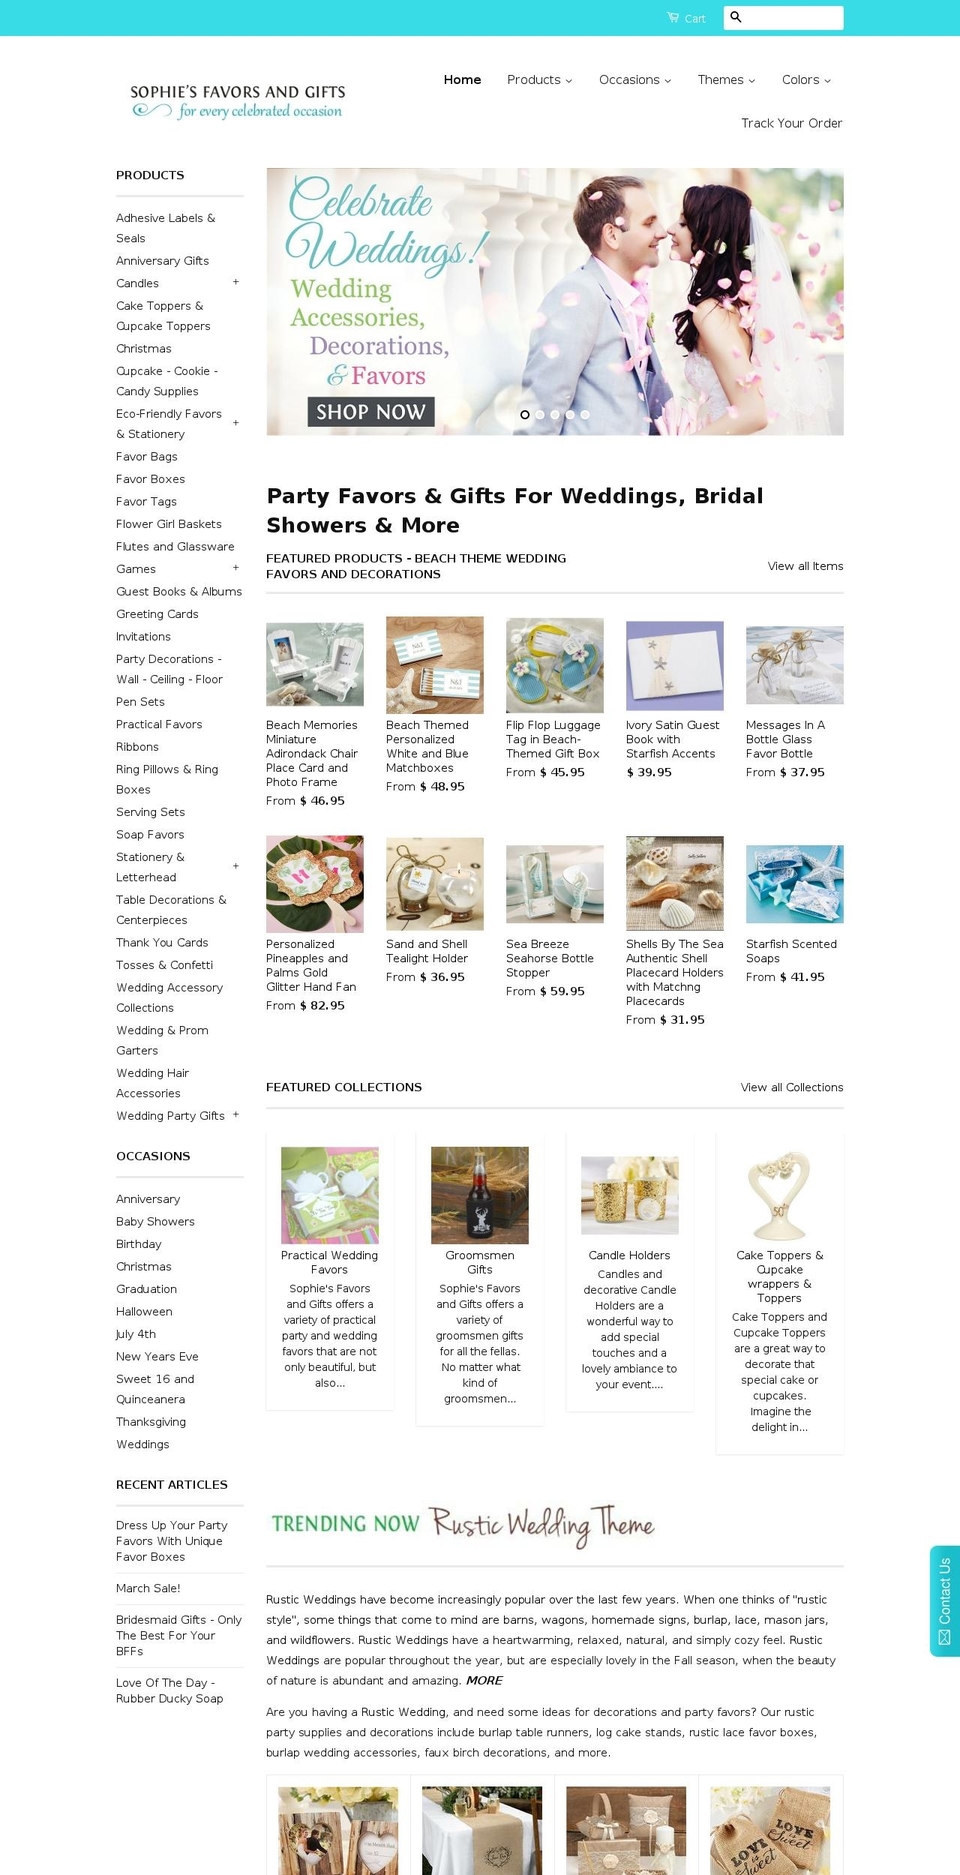 sophies-favors-and-gifts.myshopify.com shopify website screenshot